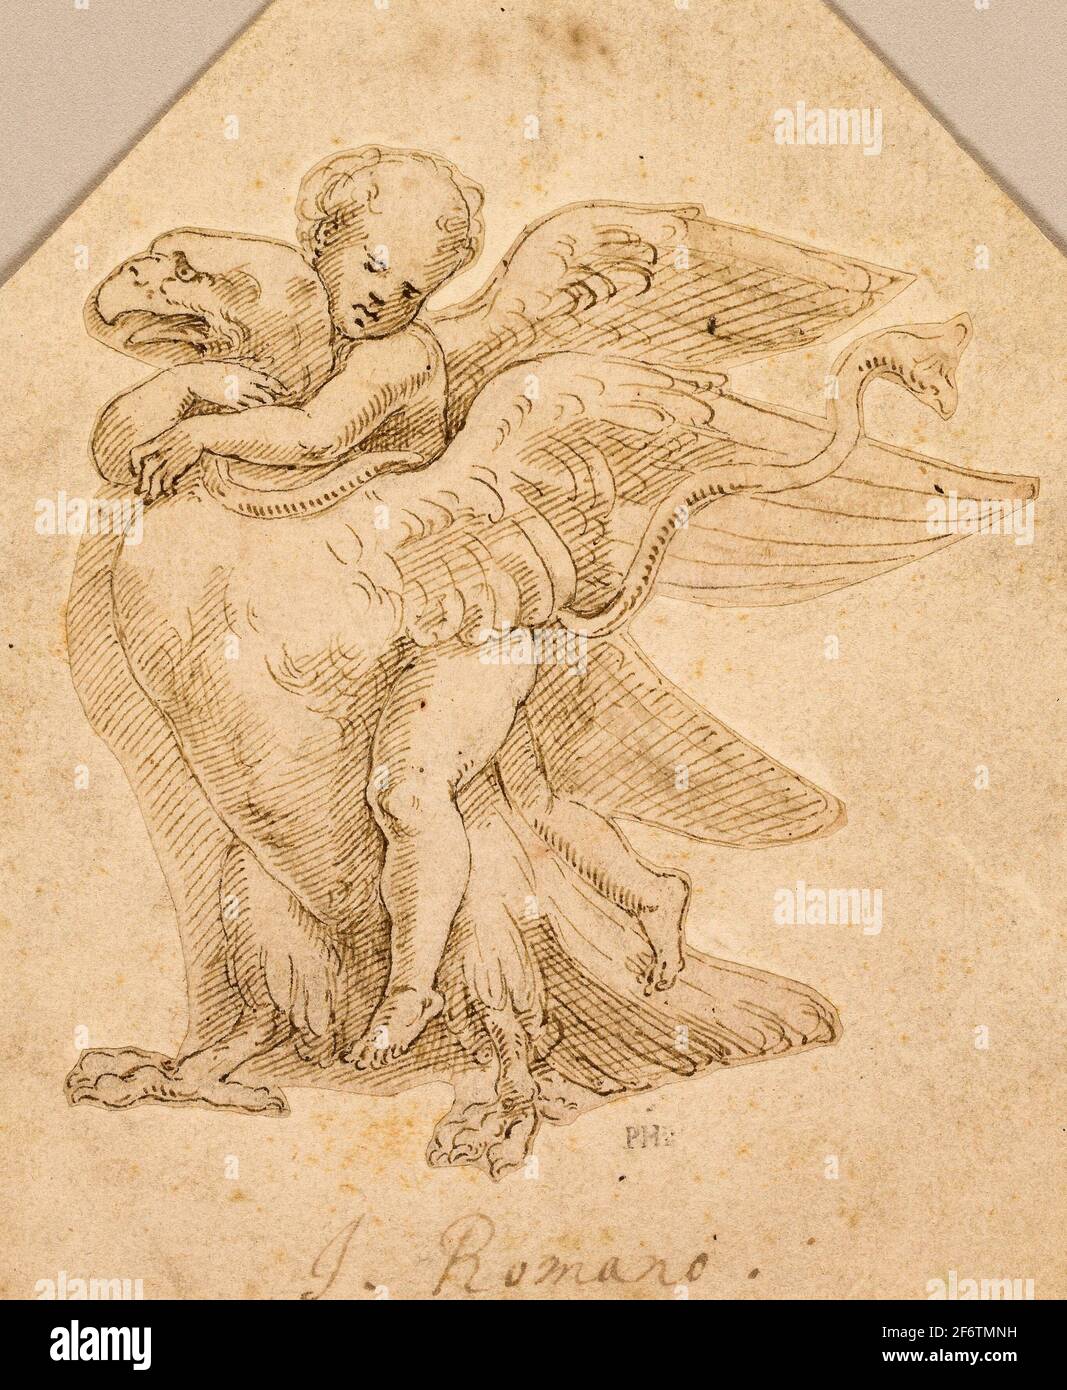 Author: Giulio Romano. Cupid Astride an Eagle - Giulio Pippi, called Giulio Romano, after Italian, c. 1499-1546. Pen and brown ink with brush and Stock Photo